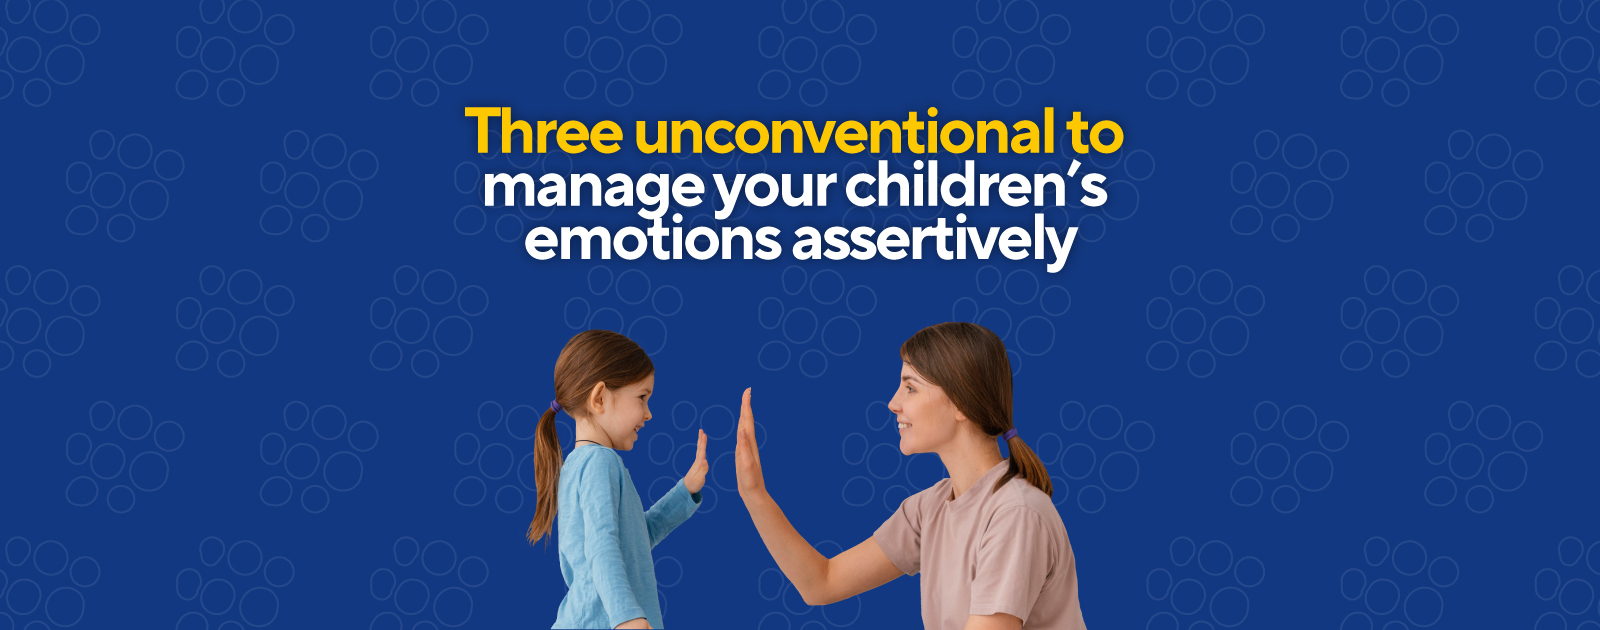 Three unconventional practices to manage your children’s emotions assertively